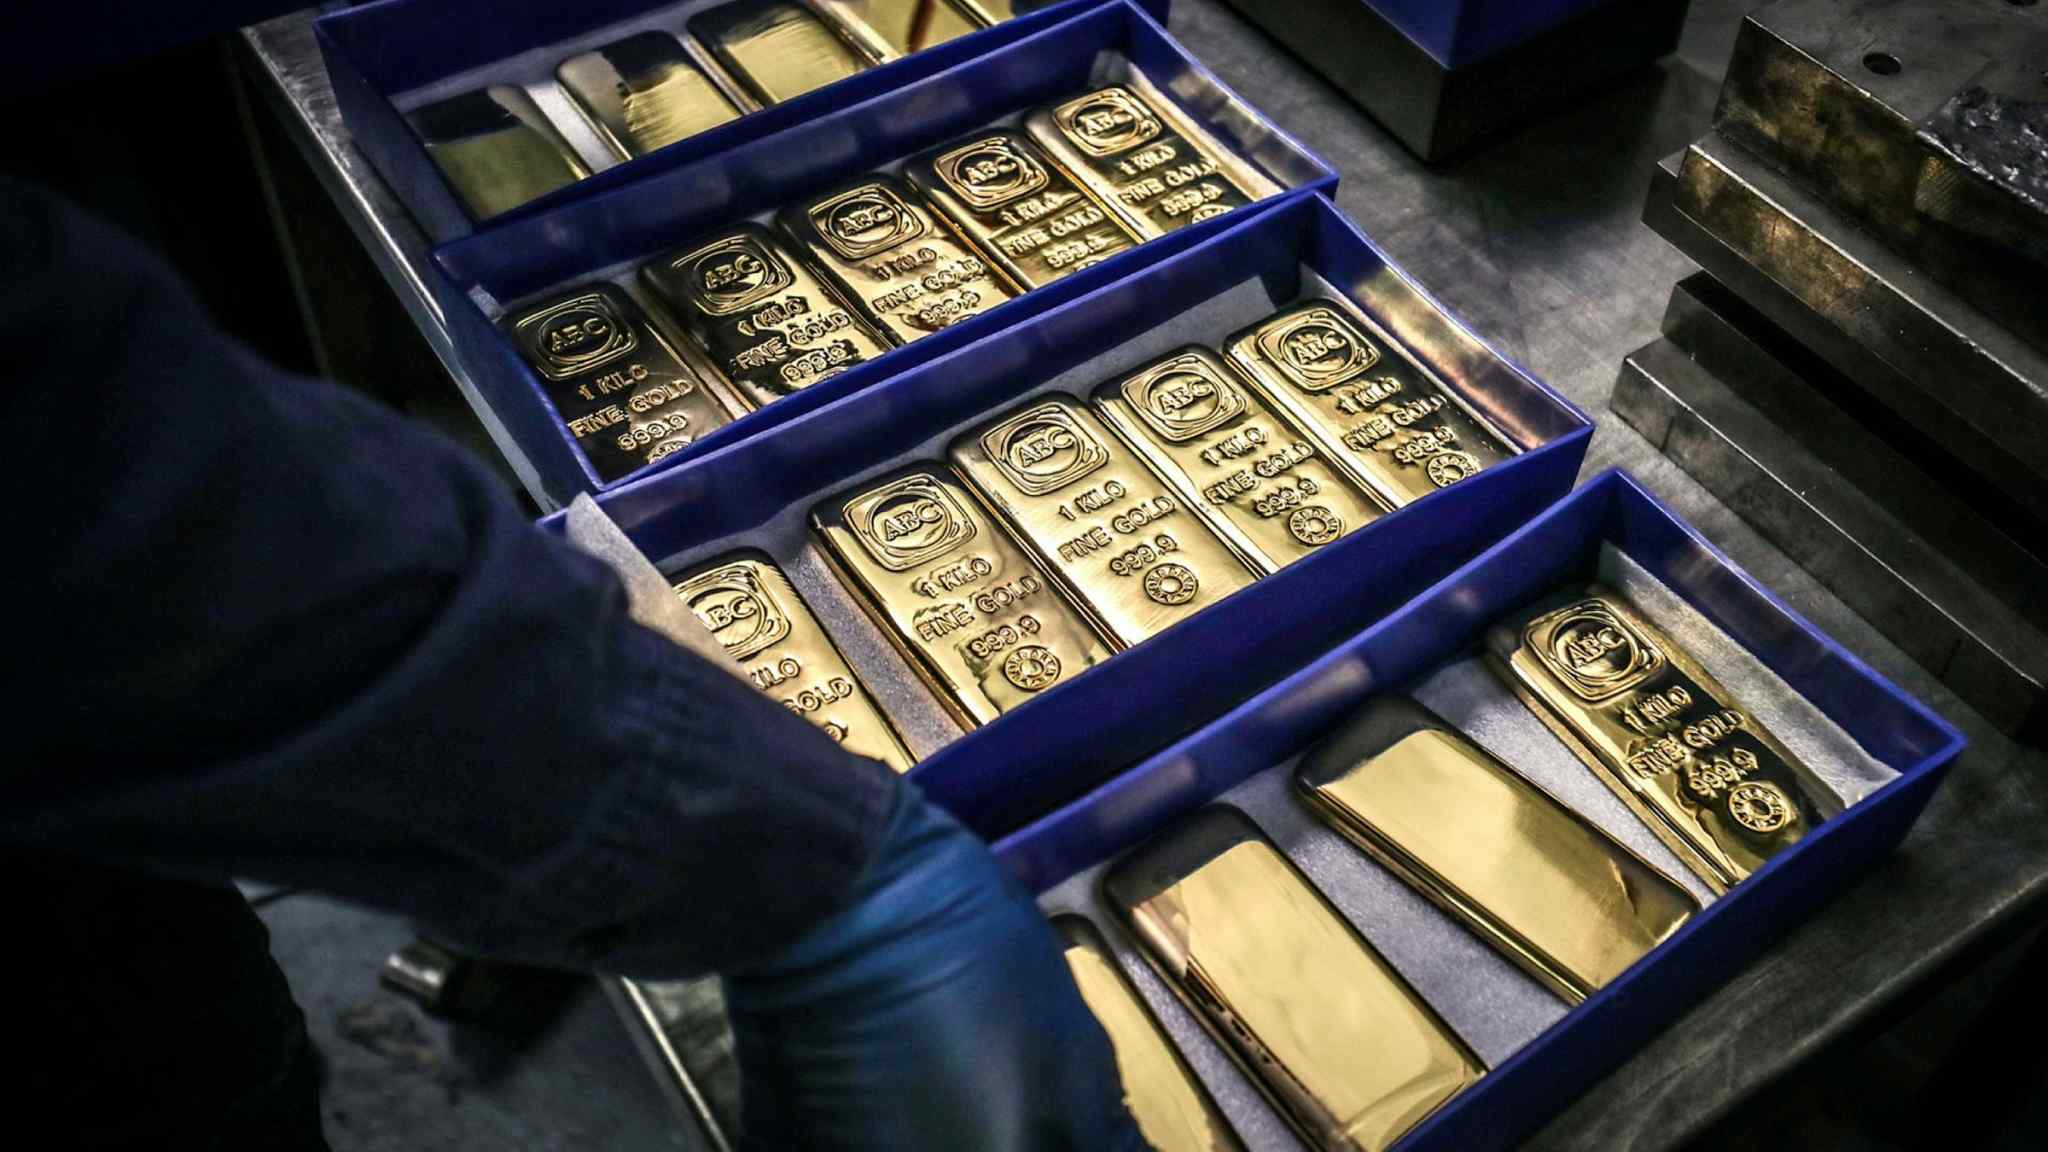 Live news: Political tensions push up gold and other precious metals prices